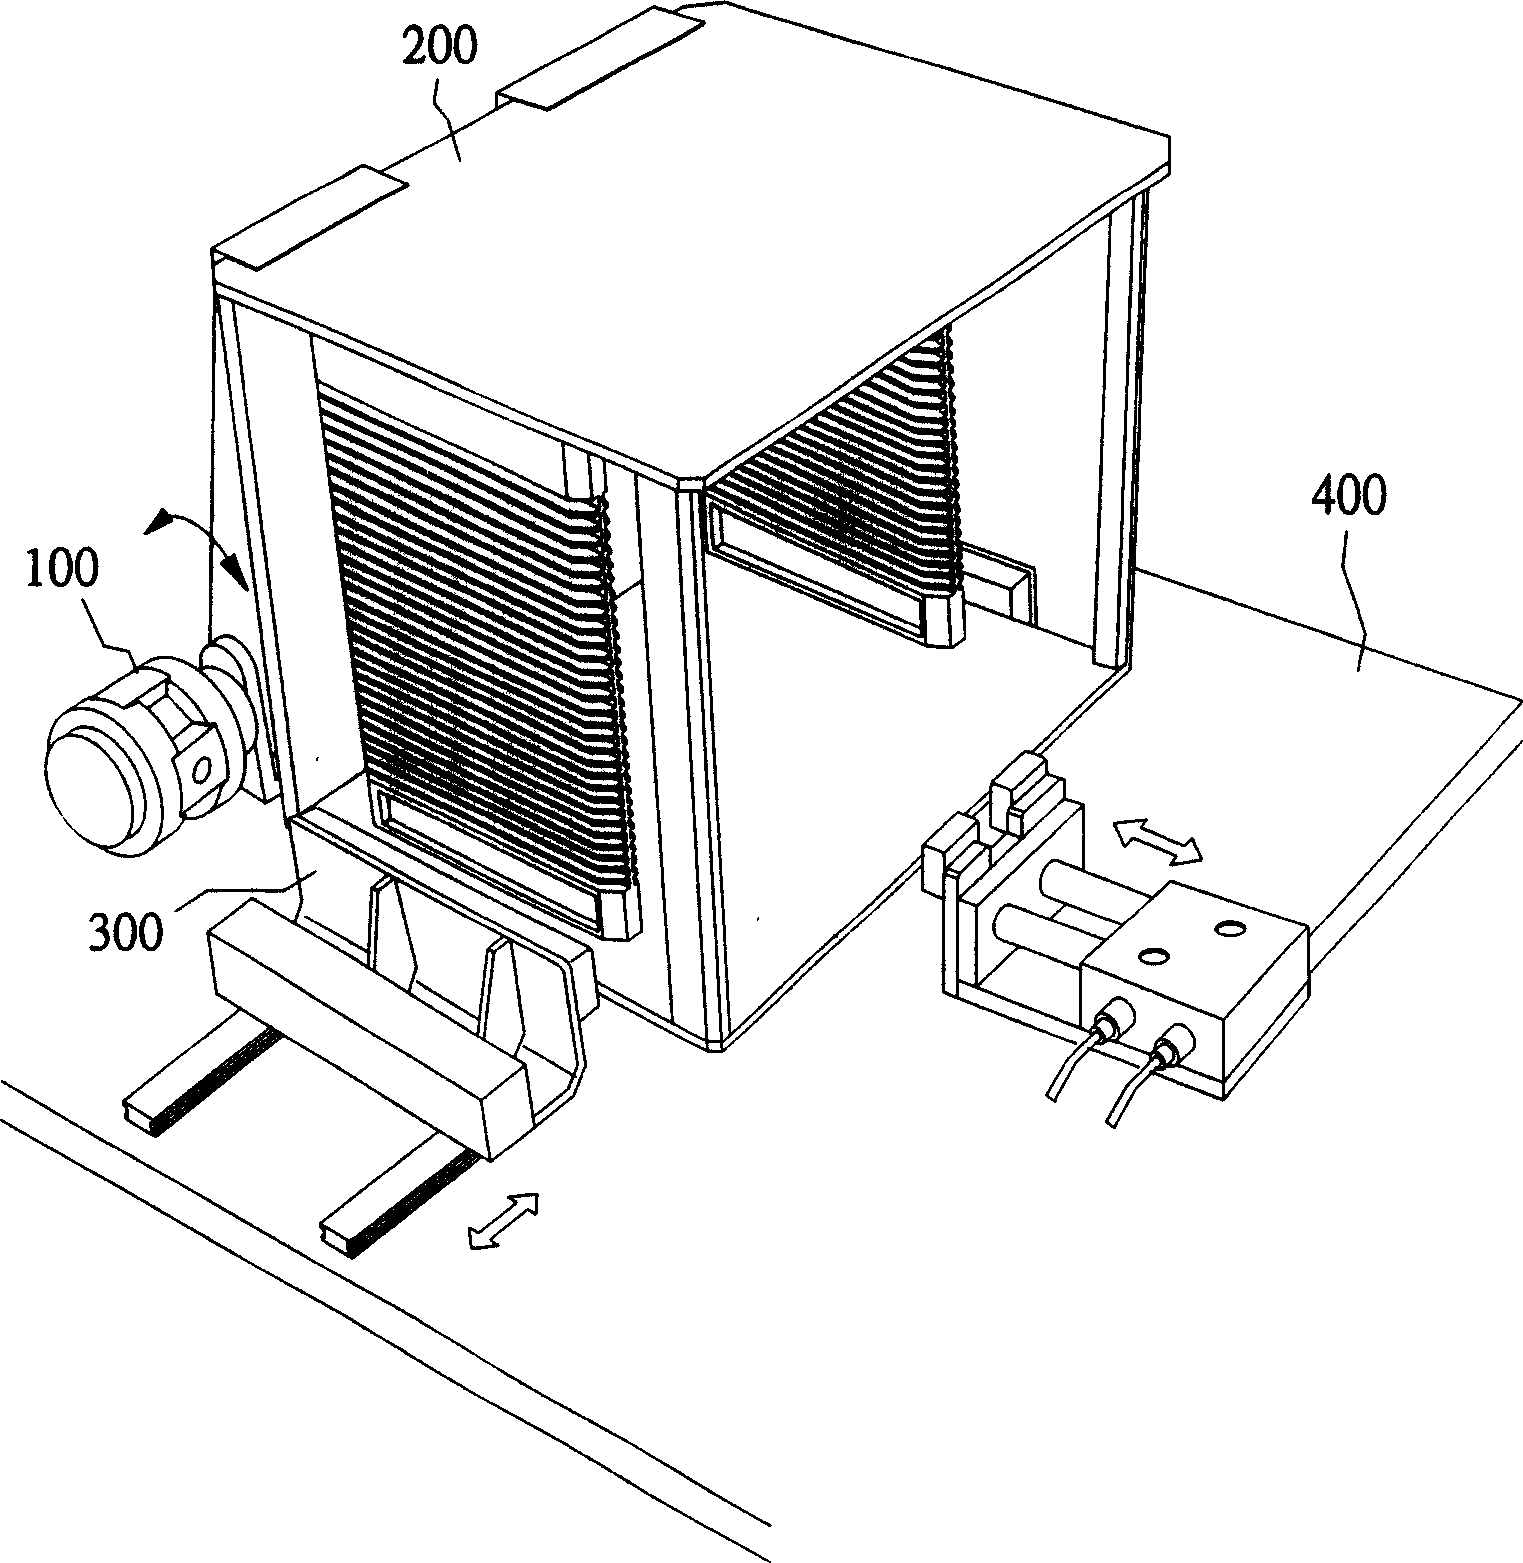 Carsette turning over and positioning device